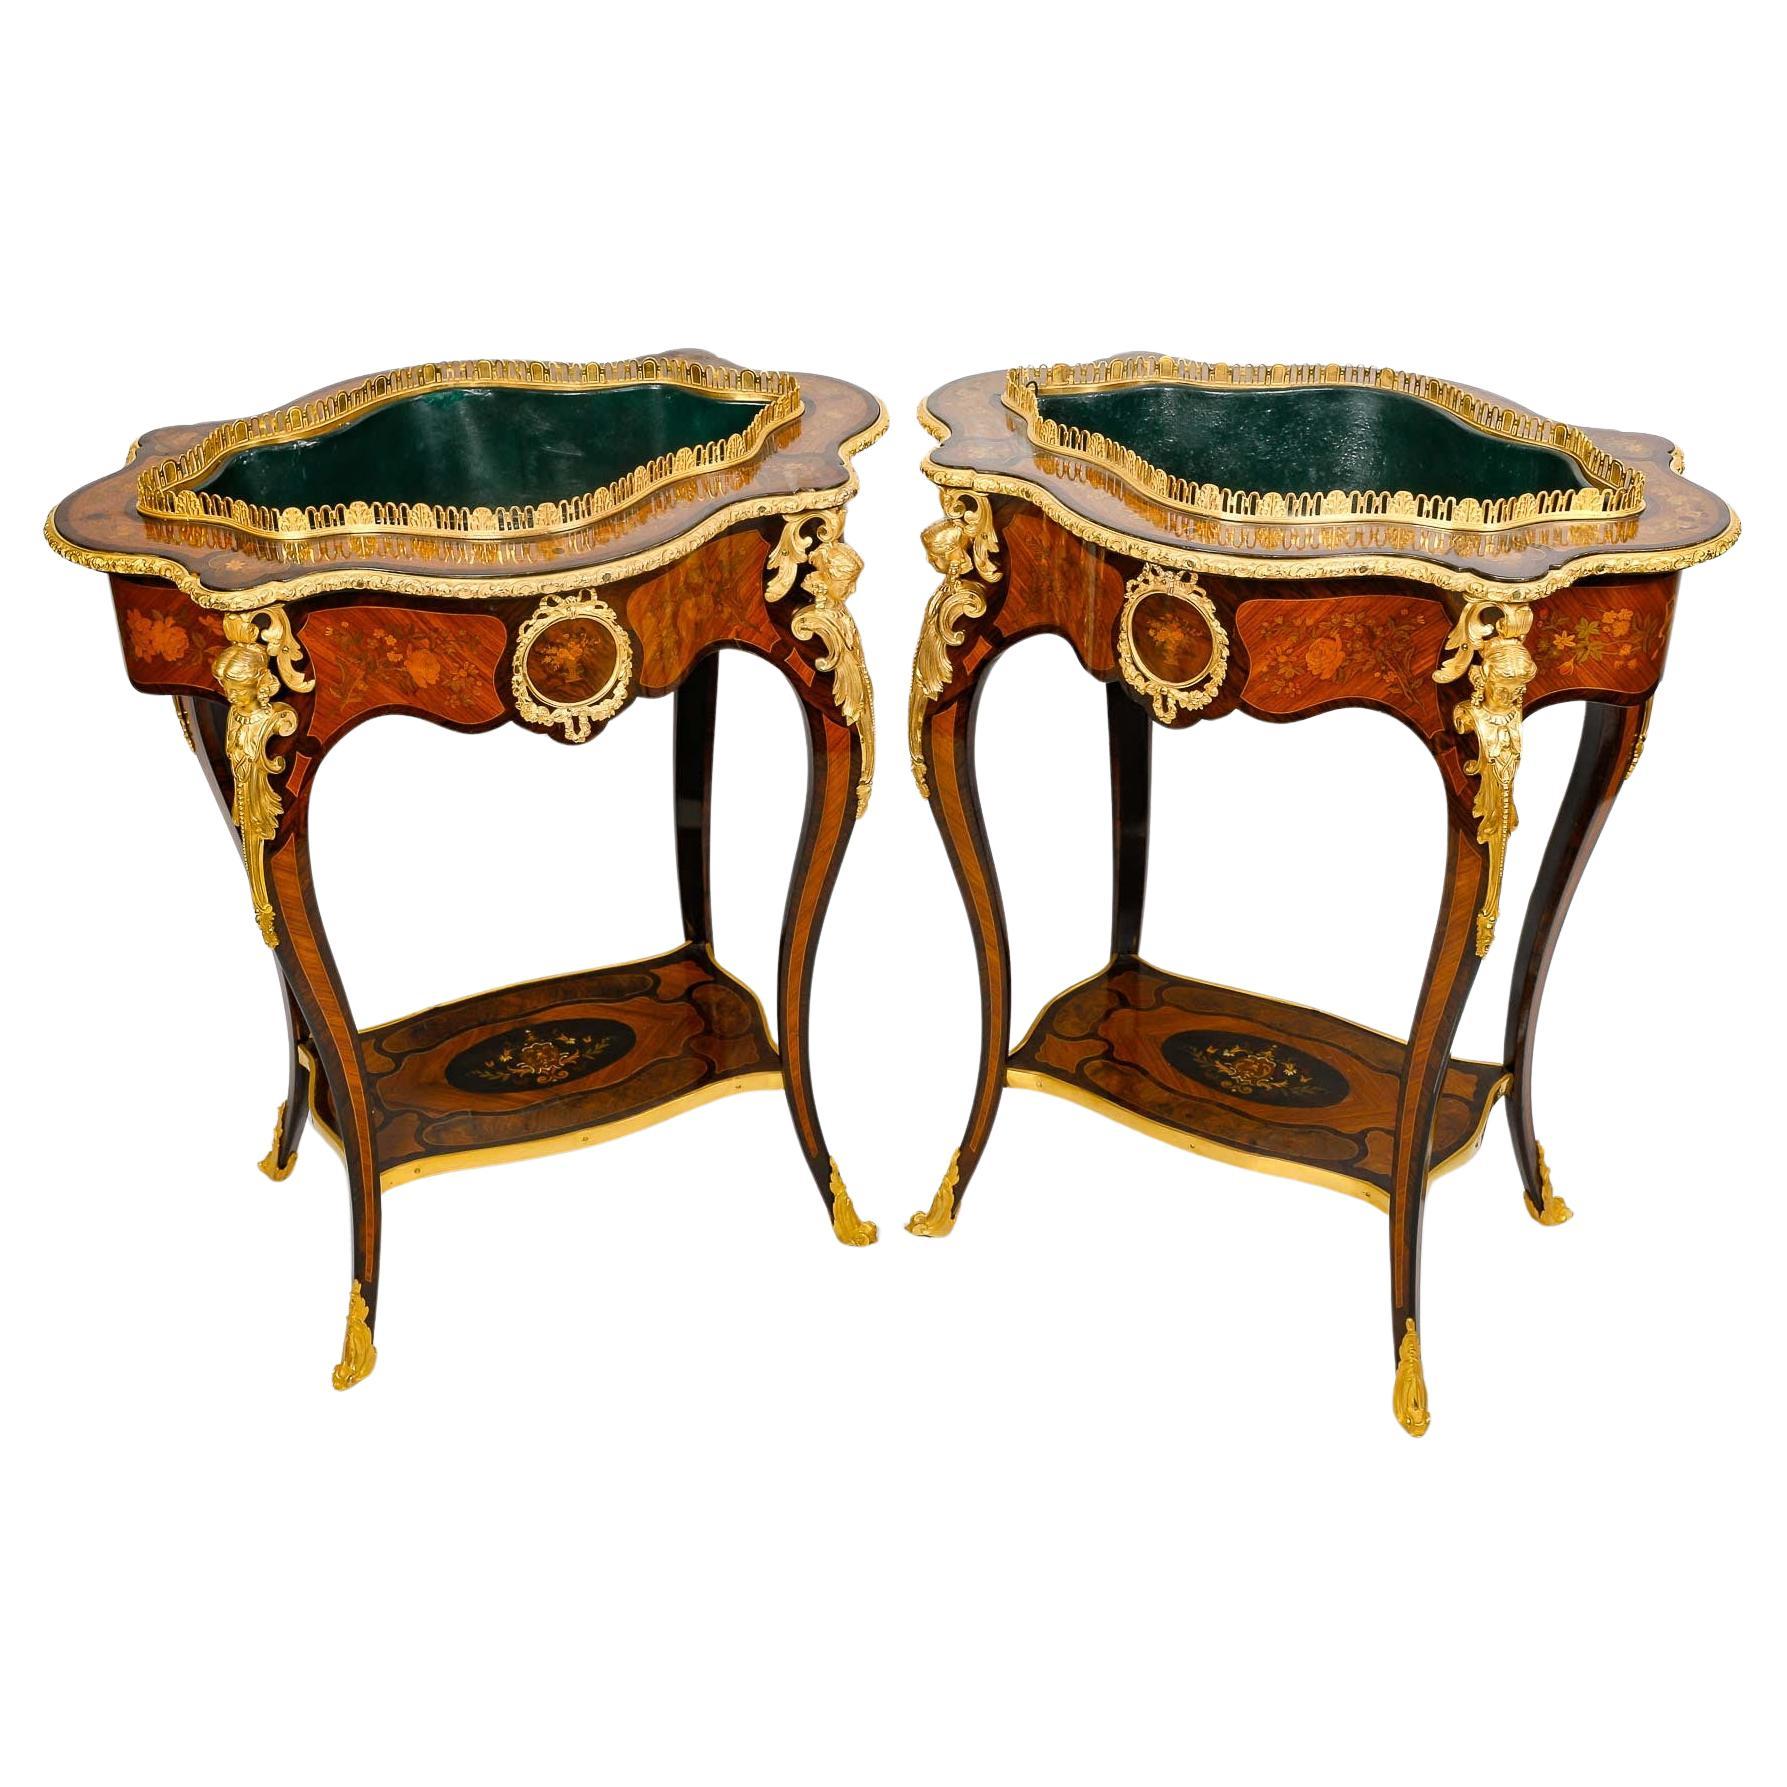 Pair of Precious Wood Marquetry and Gilt Bronze Planters, 19th Century.